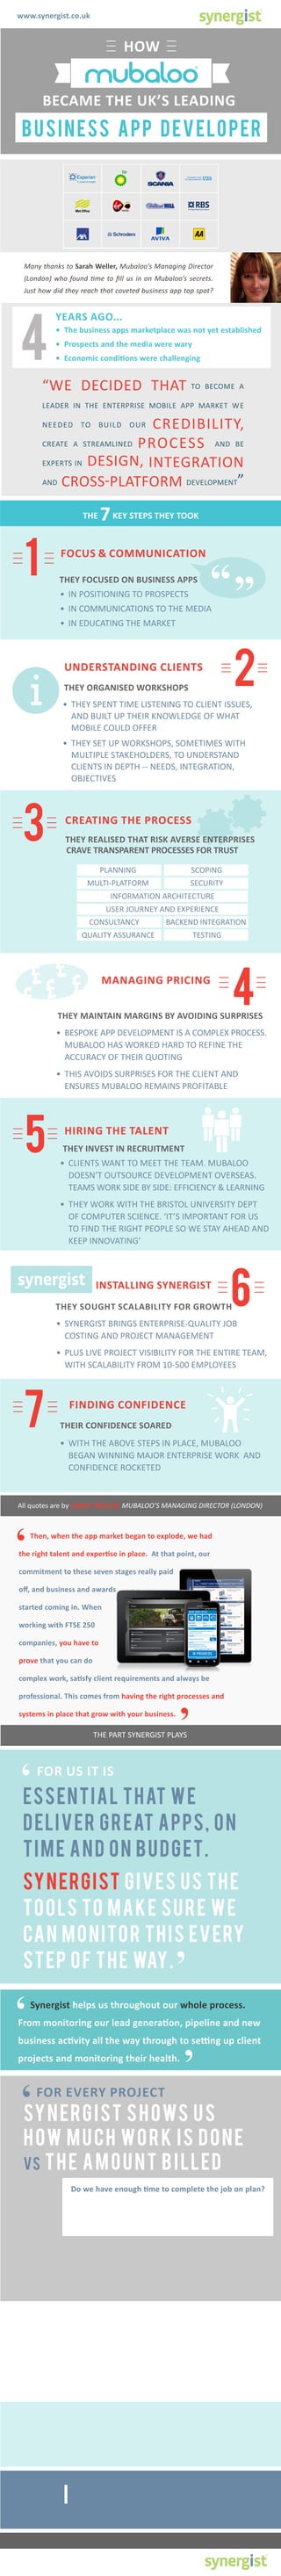 www.synergist.co.uk

HOW
BECAME THE UK’S LEADING

B U S I N ESS A P P D EV ELO P ER

Many thanks to Sarah Weller, Mubaloo’s Managing Director
(London) who found time to fill us in on Mubaloo’s secrets.
Just how did they reach that coveted business app top spot?

4

YEARS AGO...
•	 The business apps marketplace was not yet established
•	 Prospects and the media were wary
•	 Economic conditions were challenging

“WE DECIDED THAT TO BECOME A
LEADER IN THE ENTERPRISE MOBILE APP MARKET WE

CREDIBILITY,
CREATE A STREAMLINED PROCESS AND BE
EXPERTS IN DESIGN, INTEGRATION
AND CROSS-PLATFORM DEVELOPMENT”
BUILD

THE

1

TO

OUR

7 KEY STEPS THEY TOOK

FOCUS & COMMUNICATION

“

THEY FOCUSED ON BUSINESS APPS
•	 IN POSITIONING TO PROSPECTS

•	 IN COMMUNICATIONS TO THE MEDIA

“

NEEDED

•	 IN EDUCATING THE MARKET

i

2

UNDERSTANDING CLIENTS
THEY ORGANISED WORKSHOPS

•	 THEY SPENT TIME LISTENING TO CLIENT ISSUES,
AND BUILT UP THEIR KNOWLEDGE OF WHAT
MOBILE COULD OFFER
•	 THEY SET UP WORKSHOPS, SOMETIMES WITH
MULTIPLE STAKEHOLDERS, TO UNDERSTAND
CLIENTS IN DEPTH -- NEEDS, INTEGRATION,
OBJECTIVES

3

CREATING THE PROCESS
THEY REALISED THAT RISK AVERSE ENTERPRISES
CRAVE TRANSPARENT PROCESSES FOR TRUST
PLANNING

SCOPING

MULTI-PLATFORM

SECURITY

INFORMATION ARCHITECTURE
USER JOURNEY AND EXPERIENCE
CONSULTANCY

BACKEND INTEGRATION

QUALITY ASSURANCE

£
£ £
£
£

TESTING

4

MANAGING PRICING

THEY MAINTAIN MARGINS BY AVOIDING SURPRISES

•	 BESPOKE APP DEVELOPMENT IS A COMPLEX PROCESS.
MUBALOO HAS WORKED HARD TO REFINE THE
ACCURACY OF THEIR QUOTING
•	 THIS AVOIDS SURPRISES FOR THE CLIENT AND
ENSURES MUBALOO REMAINS PROFITABLE

5

HIRING THE TALENT
THEY INVEST IN RECRUITMENT
•	 CLIENTS WANT TO MEET THE TEAM. MUBALOO
DOESN’T OUTSOURCE DEVELOPMENT OVERSEAS.
TEAMS WORK SIDE BY SIDE: EFFICIENCY & LEARNING
•	 THEY WORK WITH THE BRISTOL UNIVERSITY DEPT
OF COMPUTER SCIENCE. ‘IT’S IMPORTANT FOR US
TO FIND THE RIGHT PEOPLE SO WE STAY AHEAD AND
KEEP INNOVATING’

synergist

6

R

INSTALLING SYNERGIST

THEY SOUGHT SCALABILITY FOR GROWTH

•	 SYNERGIST BRINGS ENTERPRISE-QUALITY JOB
COSTING AND PROJECT MANAGEMENT
•	 PLUS LIVE PROJECT VISIBILITY FOR THE ENTIRE TEAM,
WITH SCALABILITY FROM 10-500 EMPLOYEES

7

FINDING CONFIDENCE
THEIR CONFIDENCE SOARED
•	 WITH THE ABOVE STEPS IN PLACE, MUBALOO
BEGAN WINNING MAJOR ENTERPRISE WORK AND
CONFIDENCE ROCKETED

All quotes are by SARAH WELLER, MUBALOO’S MANAGING DIRECTOR (LONDON)

‘

Then, when the app market began to explode, we had

the right talent and expertise in place. At that point, our
commitment to these seven stages really paid
off, and business and awards
started coming in. When
working with FTSE 250
companies, you have to
prove that you can do
complex work, satisfy client requirements and always be
professional. This comes from having the right processes and
systems in place that grow with your business.

’

THE PART SYNERGIST PLAYS

‘
ESSENTIA L THAT W E
FOR US IT IS

D ELIVER G R EAT A PPS, O N
TI M E A N D O N B U D G ET.
SYN ERG IST G IVES US TH E
TO O LS TO M A KE SU R E W E
CA N M O N ITO R TH IS EVERY
STEP O F TH E WAY.

‘

’

Synergist helps us throughout our whole process.

From monitoring our lead generation, pipeline and new
business activity all the way through to setting up client
projects and monitoring their health.

’

‘ N ERG I ST S H OWS U S
SY
FOR EVERY PROJECT

H OW M U C H WO R K I S D O N E
VS T H E A M O U N T B I LLED
Do we have enough time to complete the job on plan?
Are we overrunning?
Is the project in good health?

THESE ARE ESSENTIAL WEEKLY ANALYSES
WE MAKE WITH THE SYSTEM. WE ALSO
CHECK STAFF UTILISATION WEEKLY.

‘

’

Plus we use Synergist in our marketing management. We track our

lead sources very carefully with it. It’s really important for us to know
which marketing initiatives work and which ones don’t. It helps us decide
how we should be allocating budgets. I also create reminders of actions
and who to call – you can set it all up in Synergist.

‘

’

We check the business pipeline weekly with Synergist – it’s essential.

Which projects are 95% likely to come in? 75%? 50%? It helps us decide
what resources we need to start pencilling into projects.

’

‘ T H I N G S H A P P EN FAST
HERE. YOU HAVE TO KEEP ON TOP OF IT

For other Synergist infographics and guides, see www.synergist.co.uk/info

www.synergist.co.uk

’

 